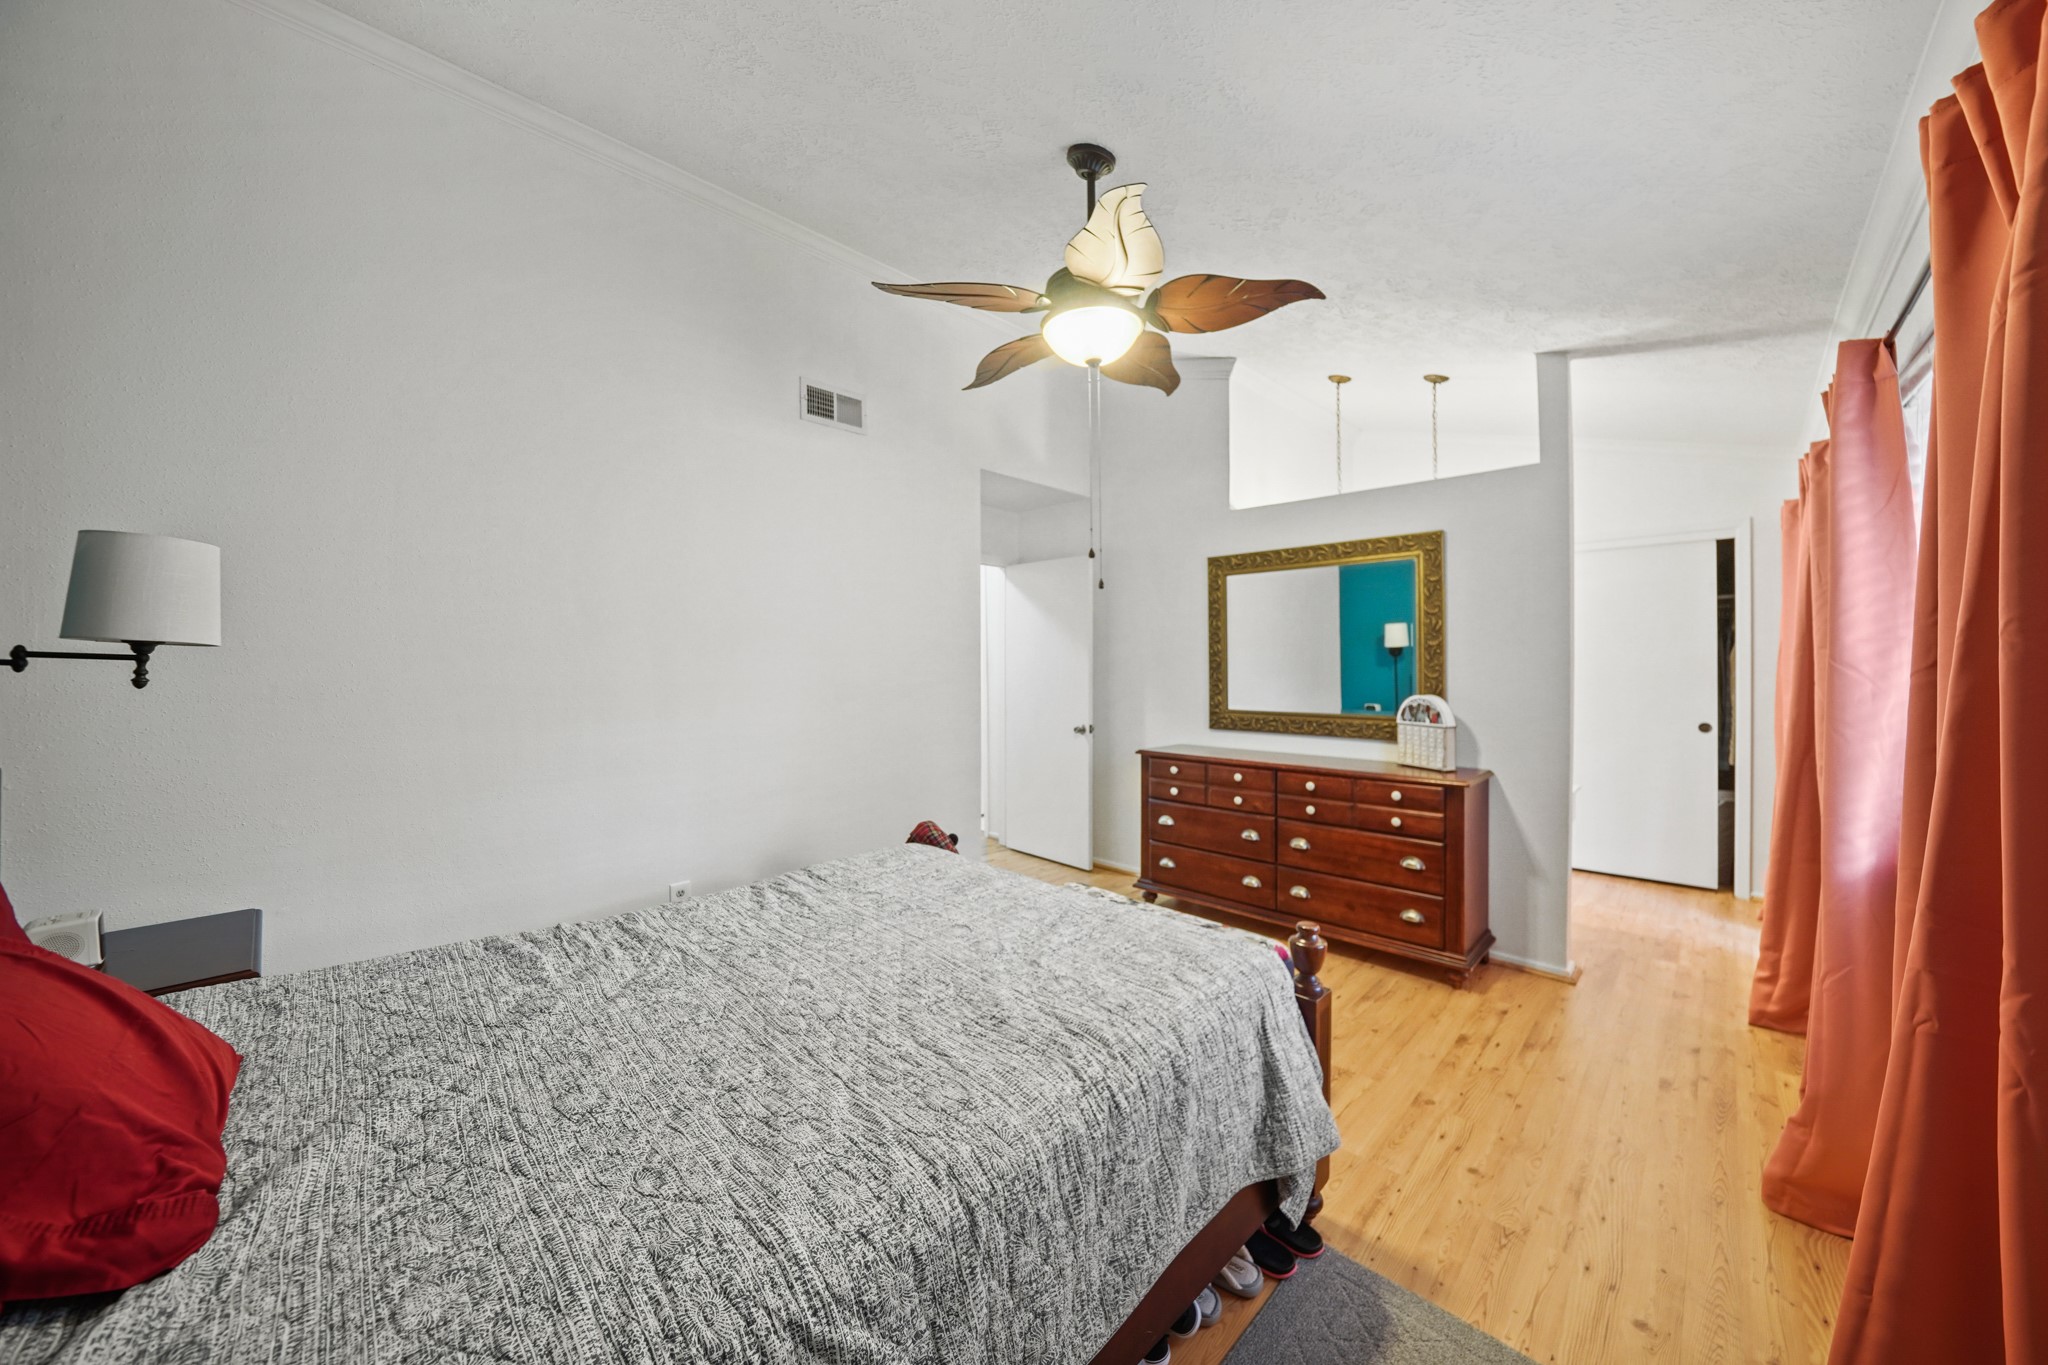 You’ll have sweet dreams in this luxurious owner's suite with neutral paint, wood laminate flooring, a soaring ceiling and plenty of space for large comfortable furnishings.